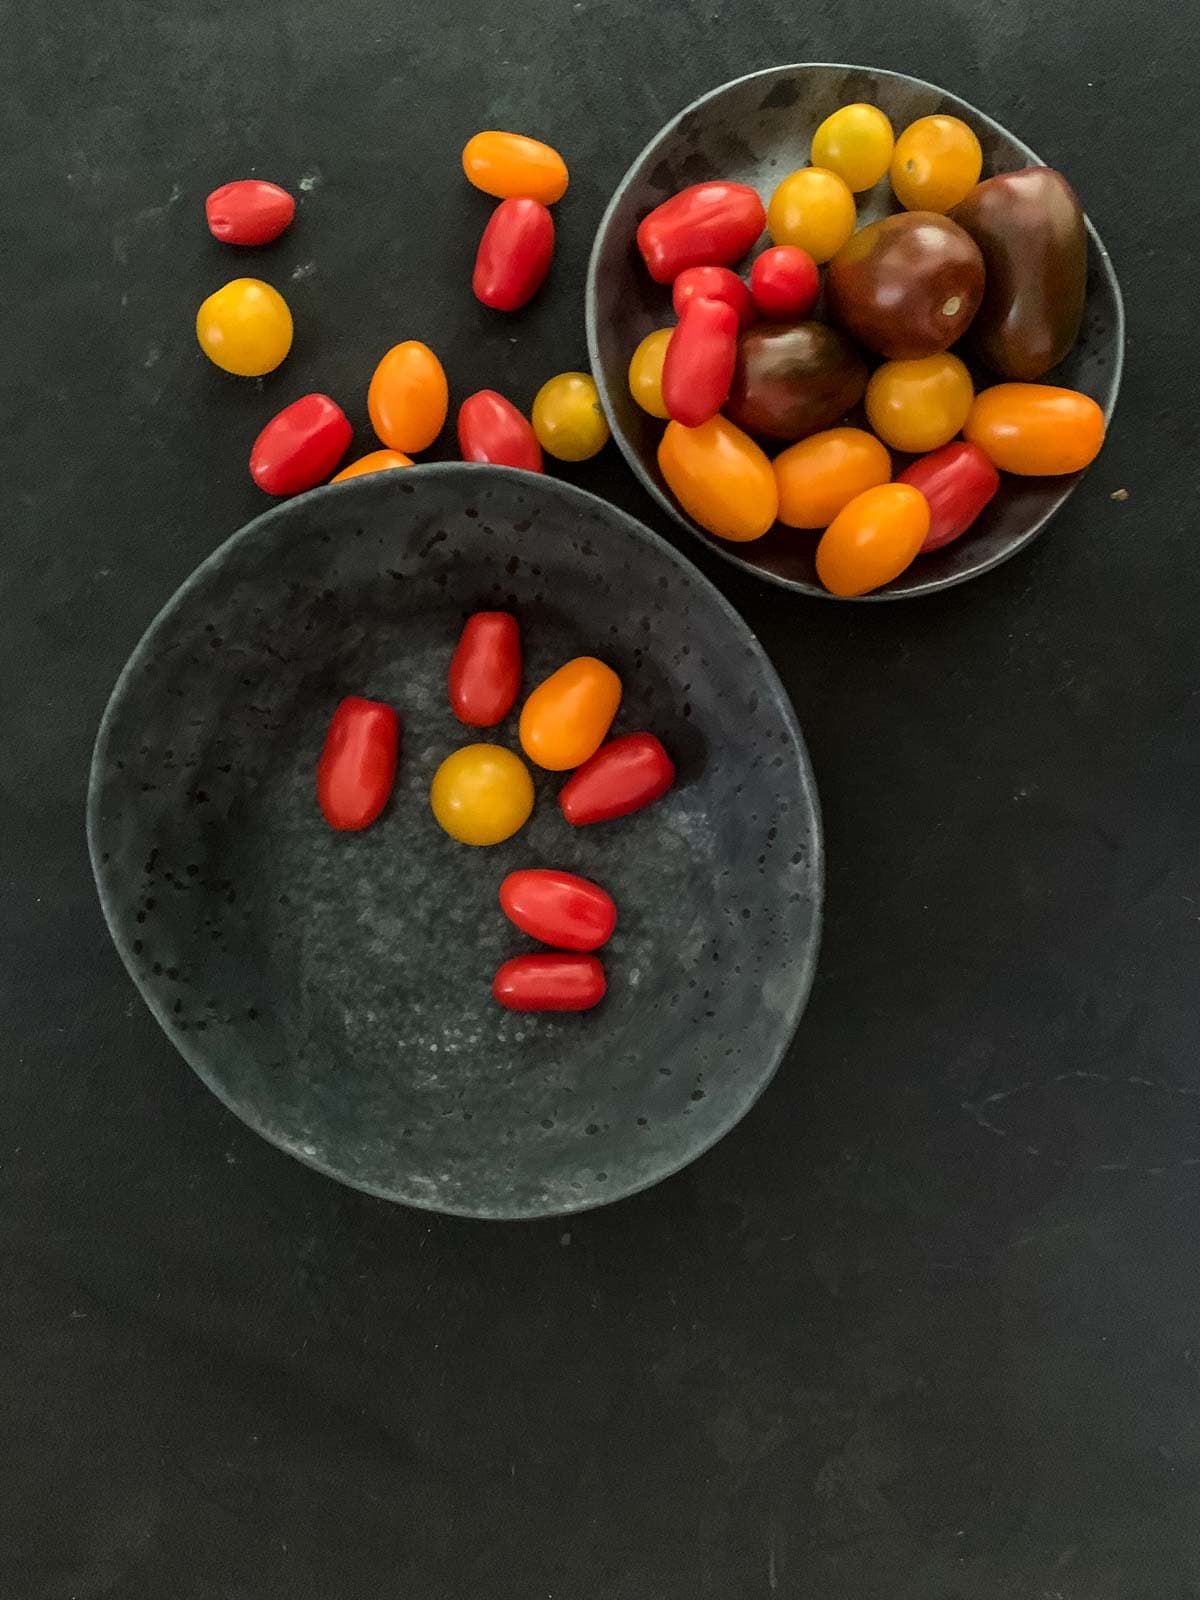 A variety of cherry tomatoes in 2 grey bowls